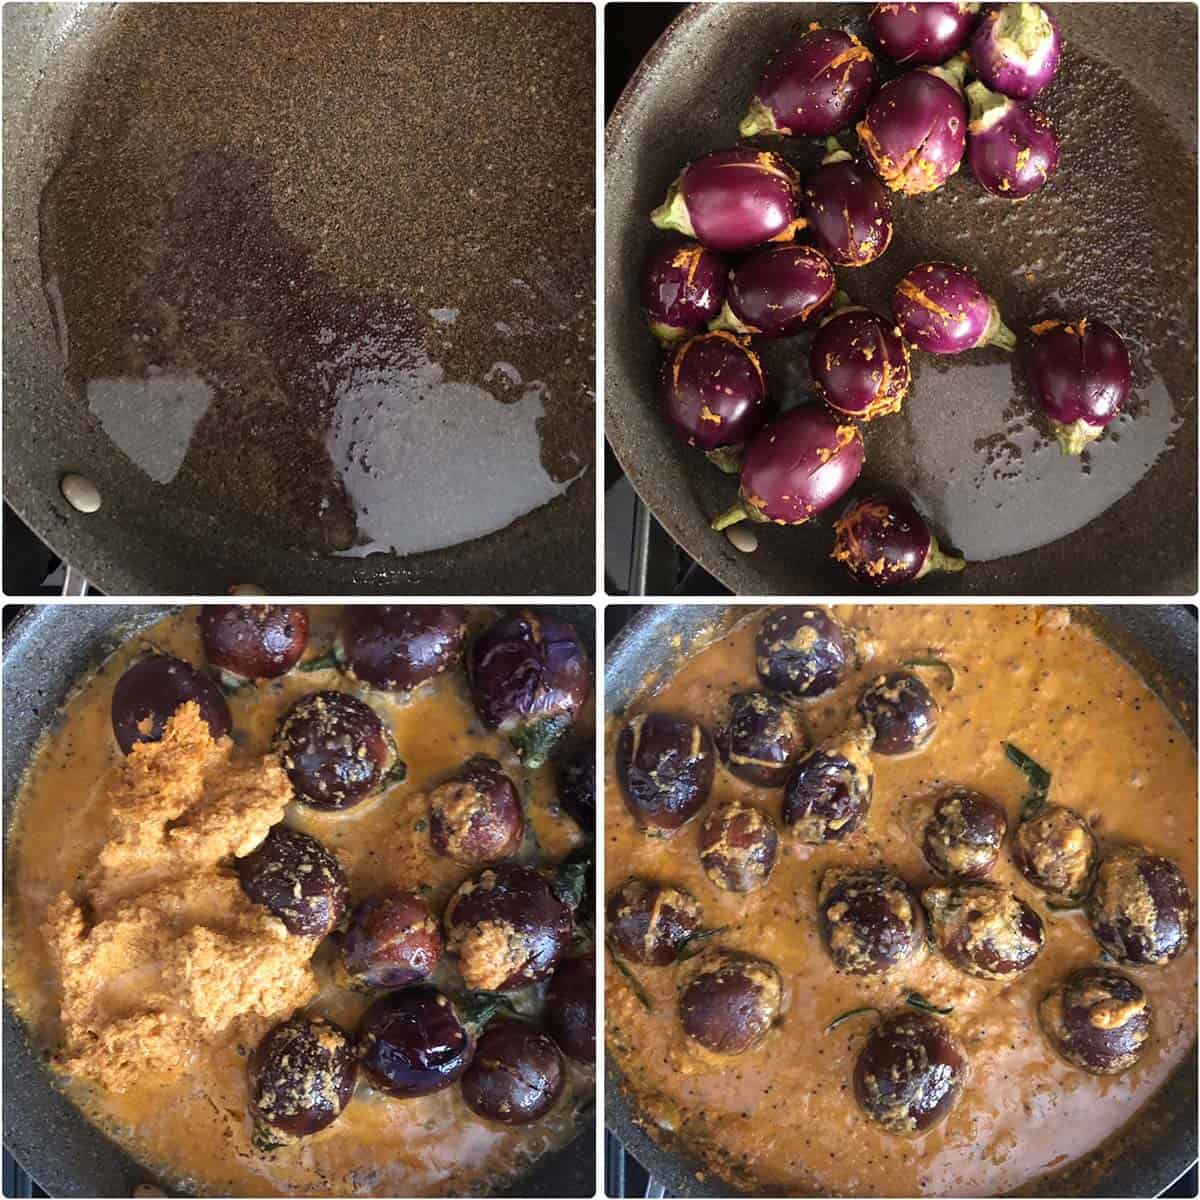 4 panel photo showing the cooking of the stuffed eggplants and masala.